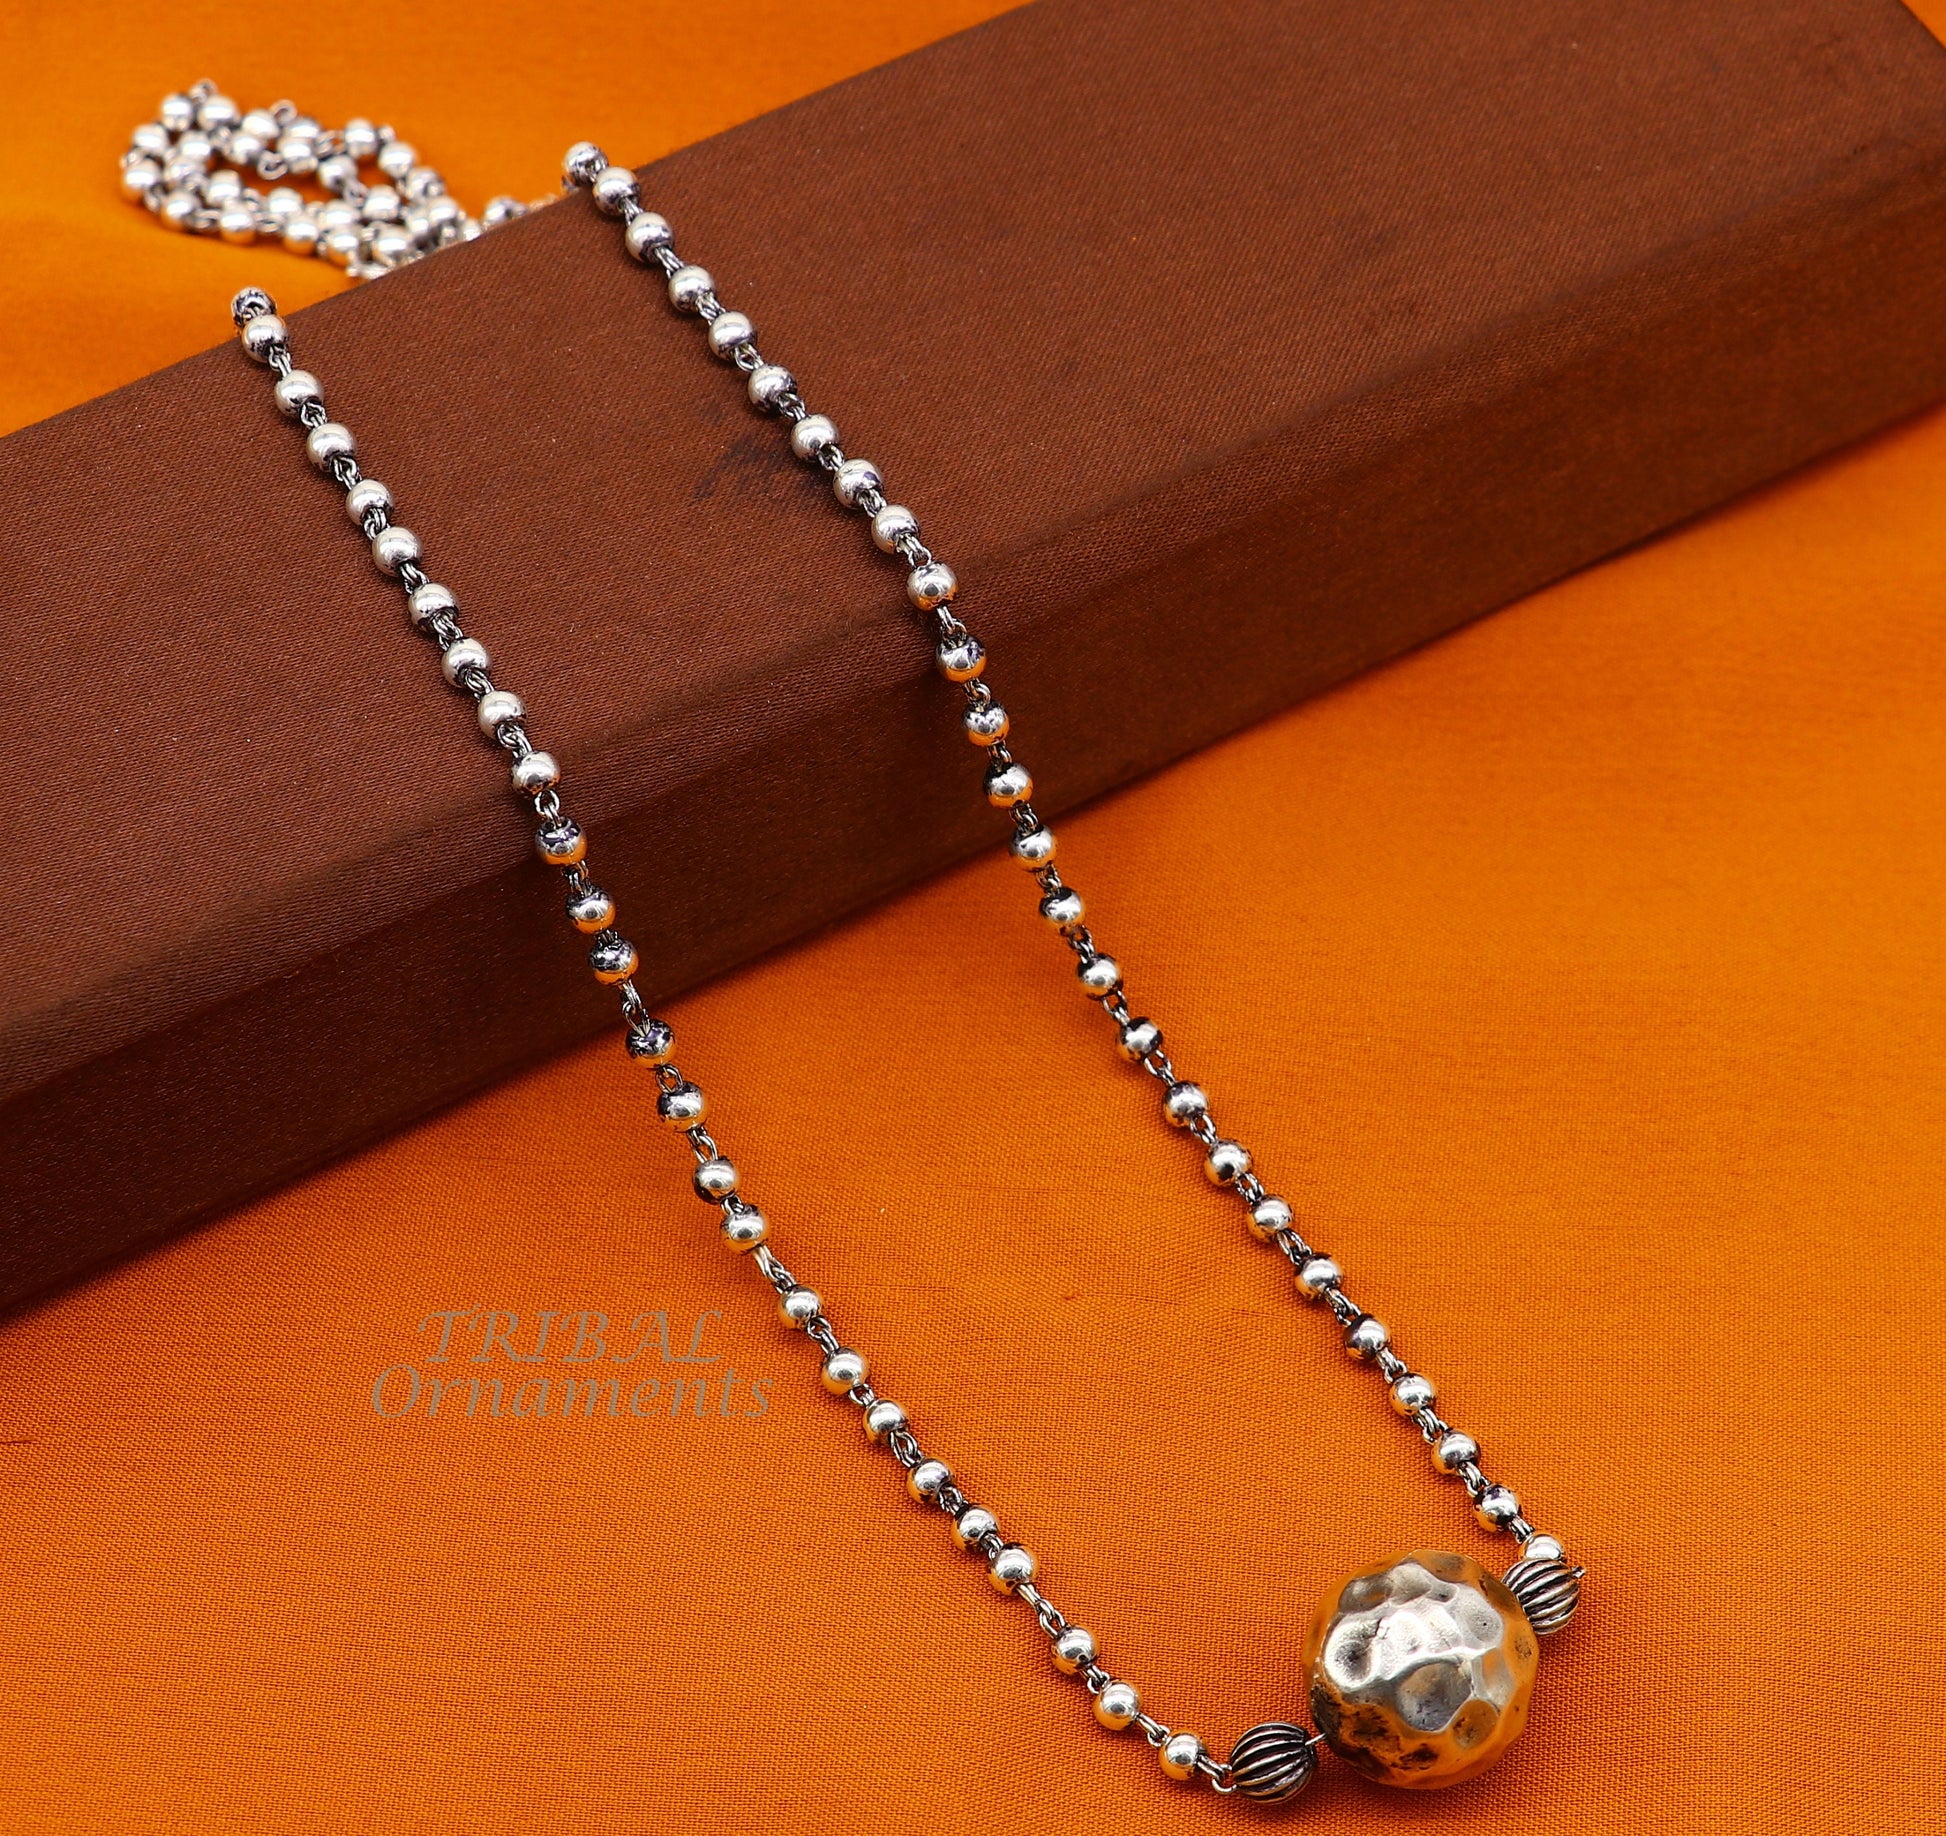 4mm Sterling Silver Bead Ball Chain Bracelet or Necklace 24 / Shiny Silver